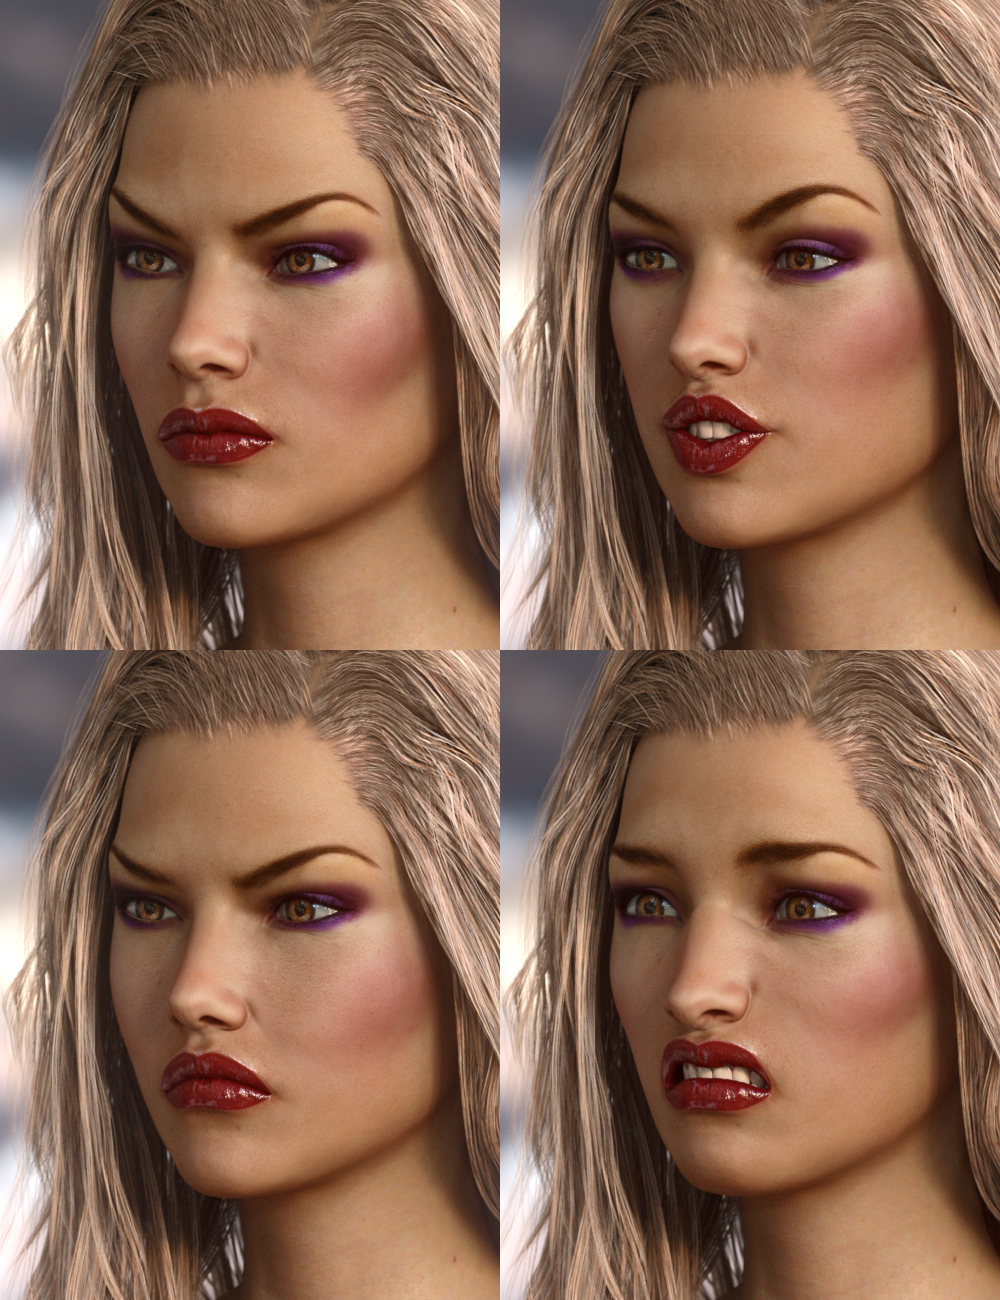 Victoria 7 Extreme Expressions by: 3DCelebrity, 3D Models by Daz 3D